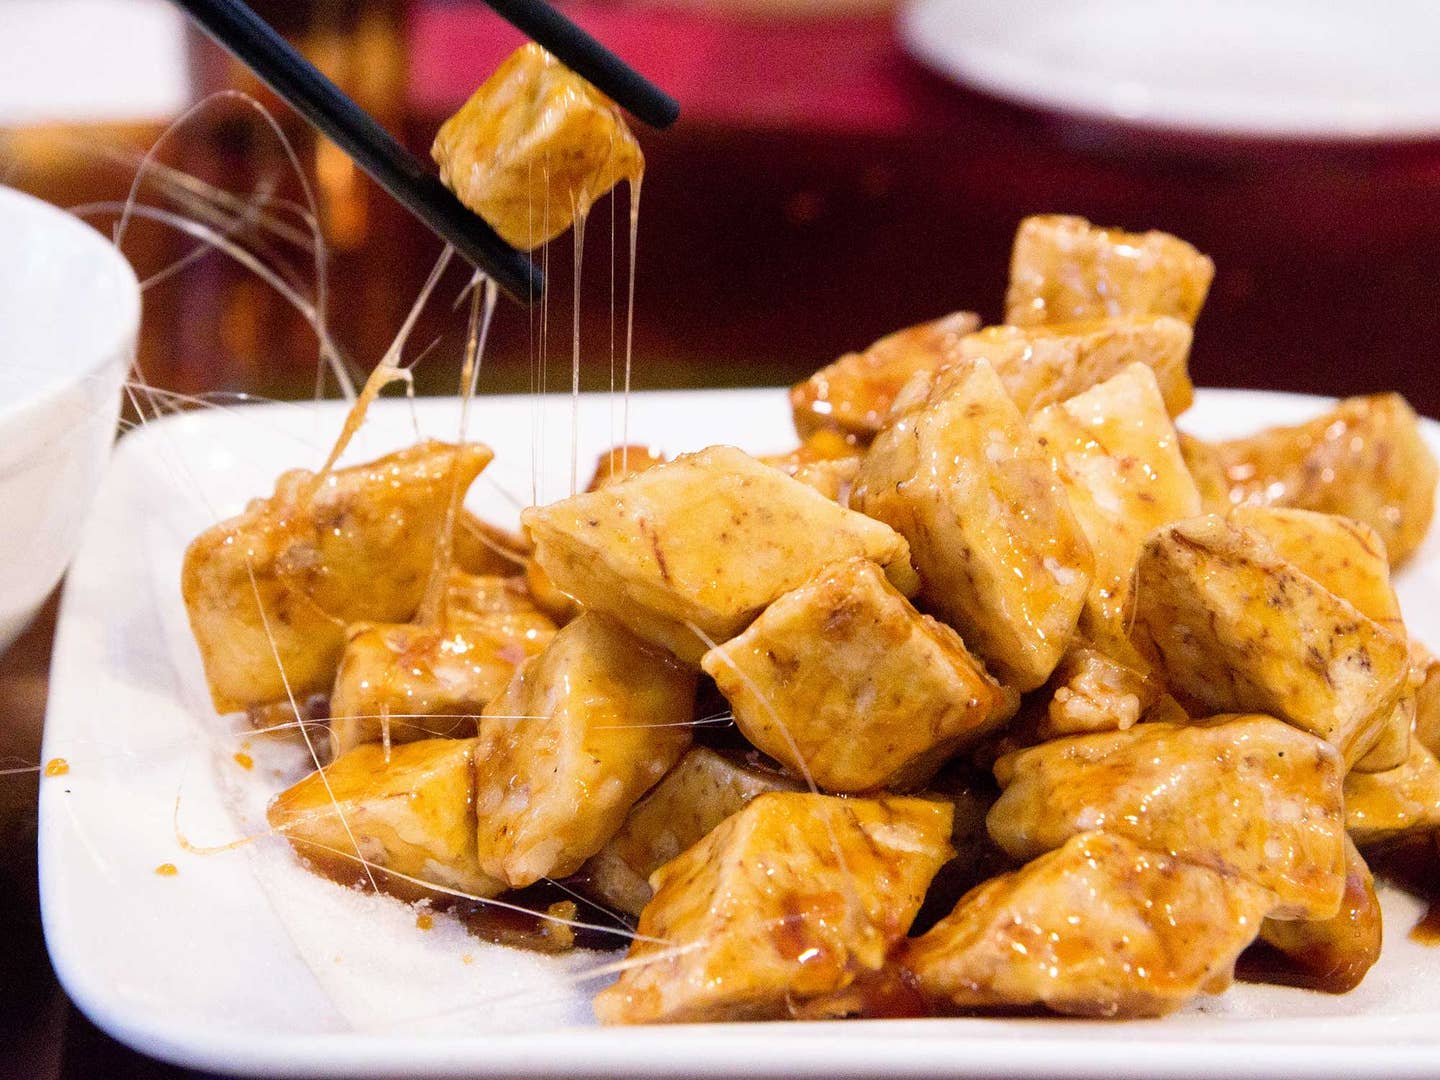 Make Your Own Caramel Candy at This Chinese Restaurant